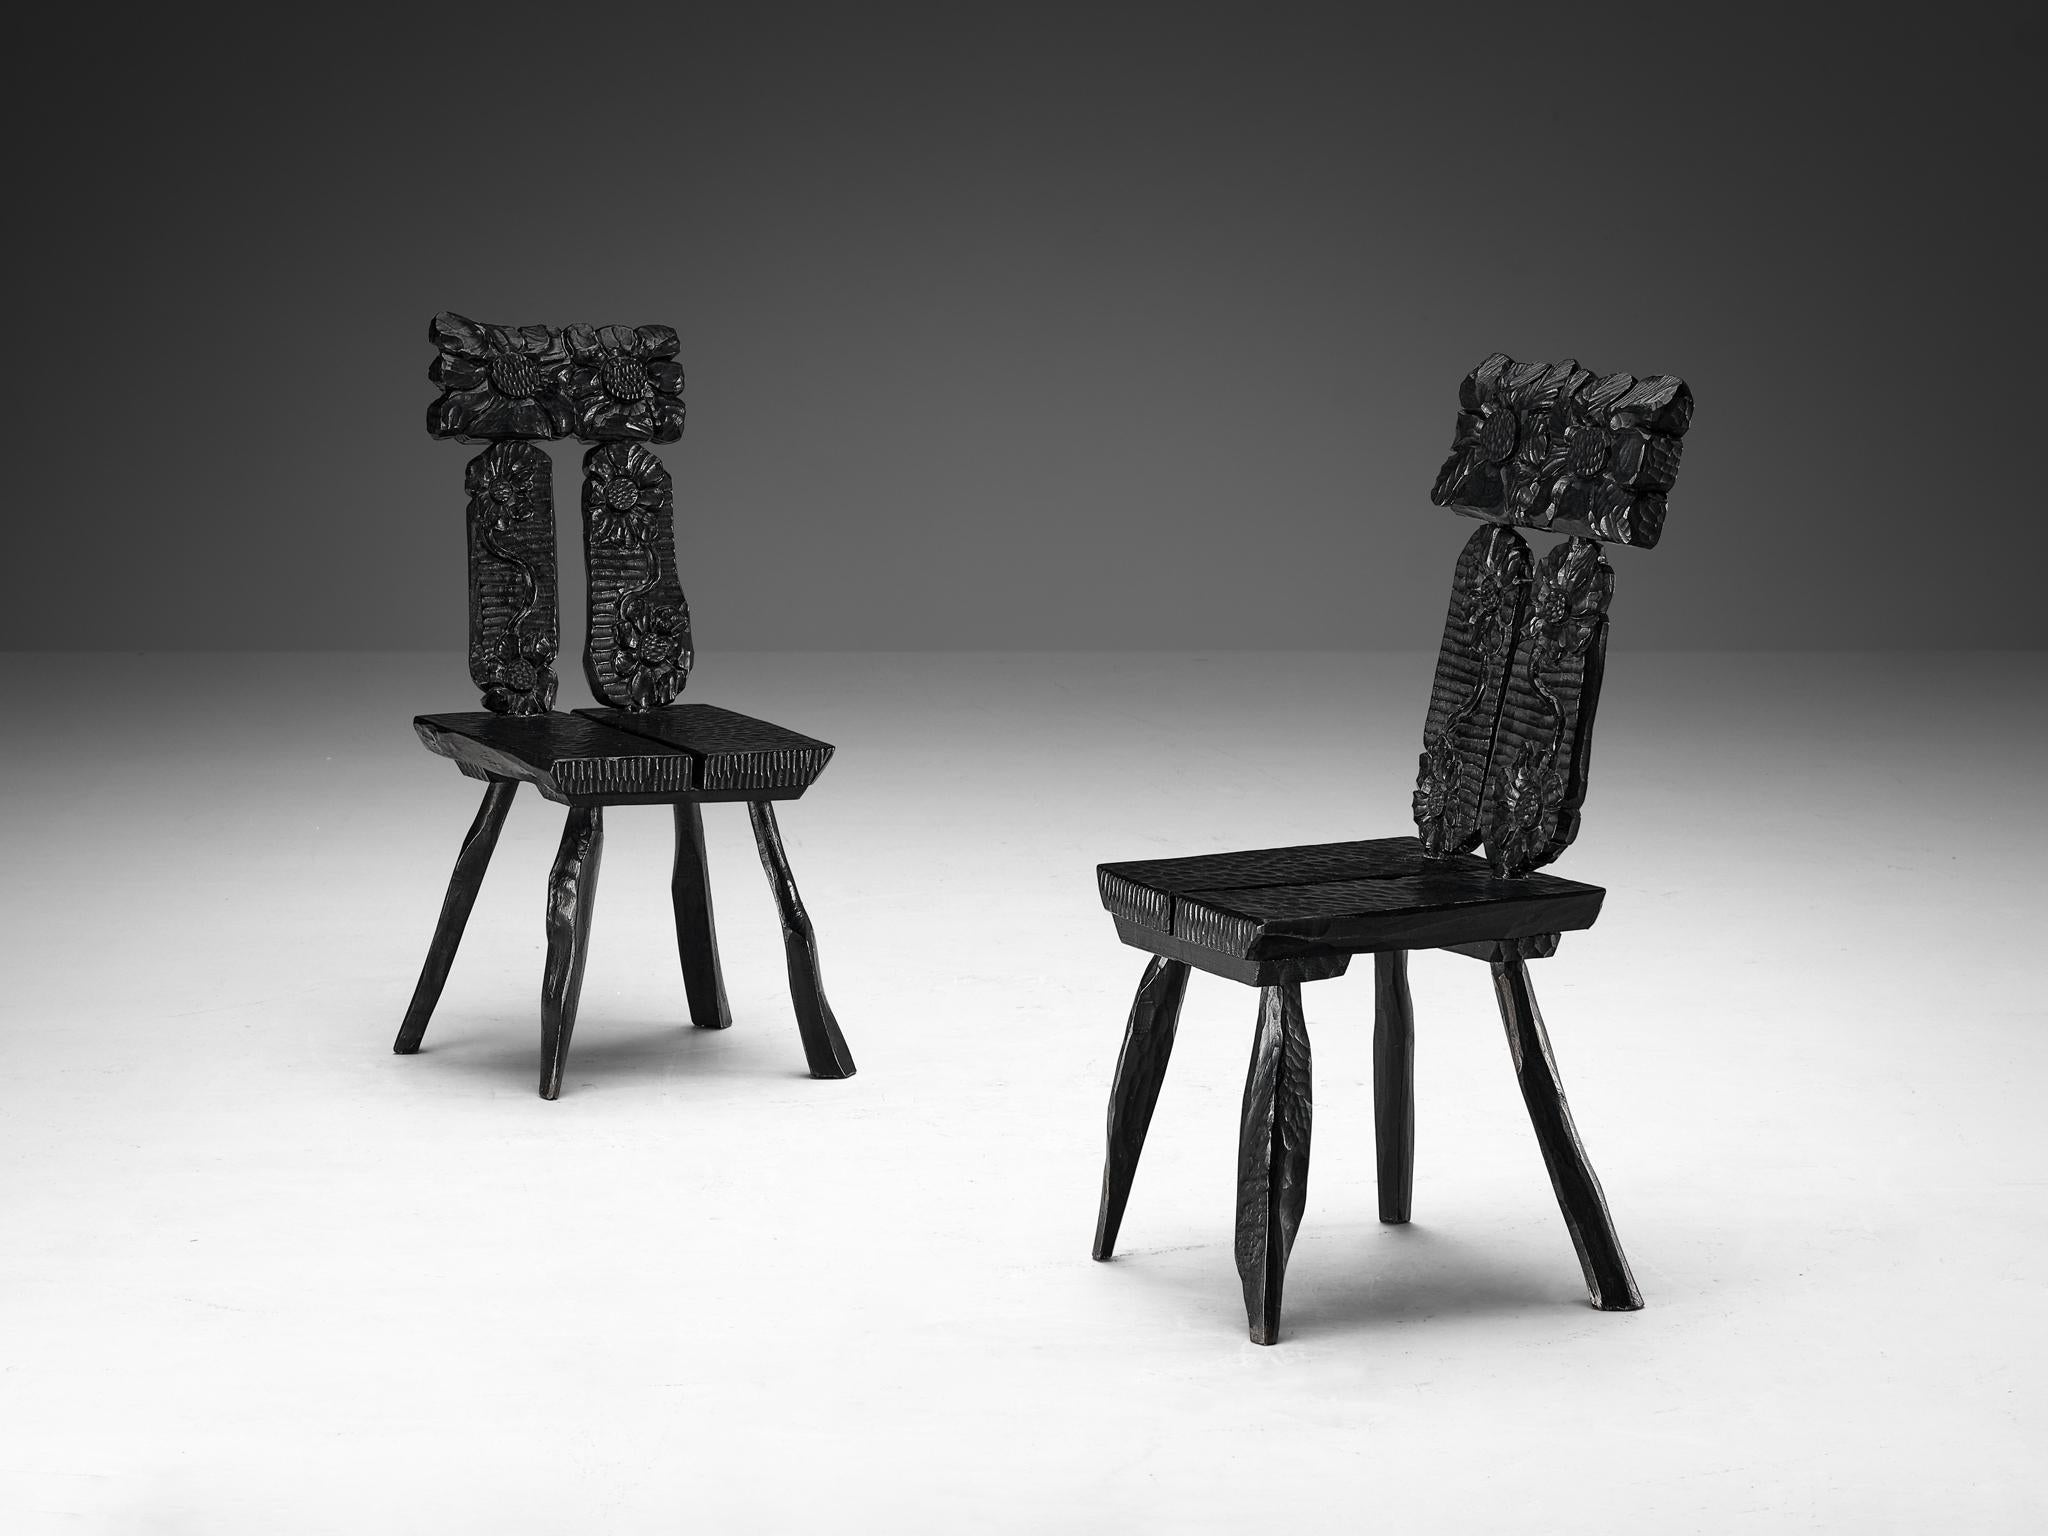 Sculptural Dining Chairs in Black Lacquered Wood with Decorative Carvings